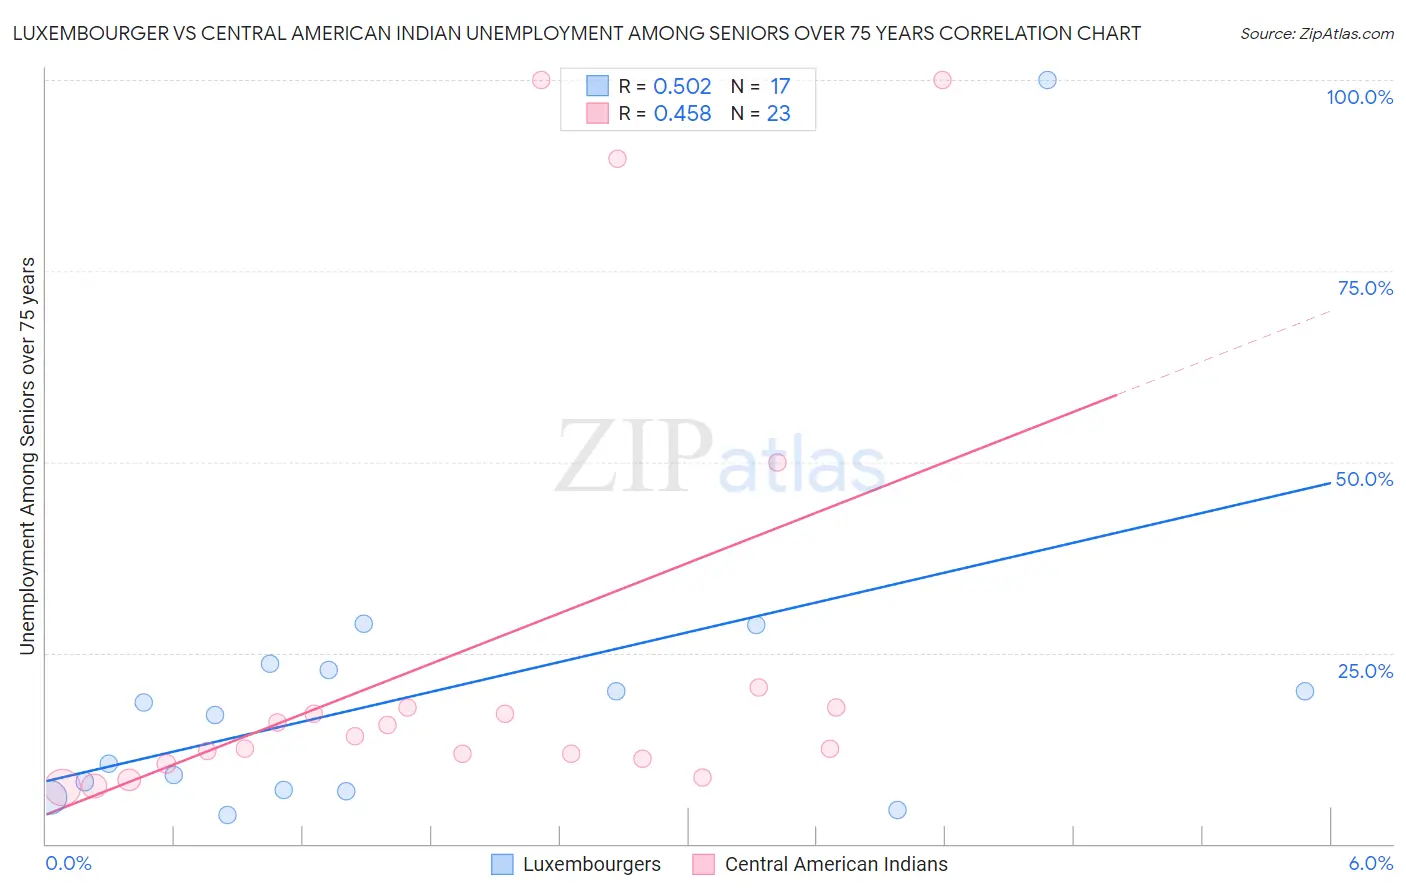 Luxembourger vs Central American Indian Unemployment Among Seniors over 75 years